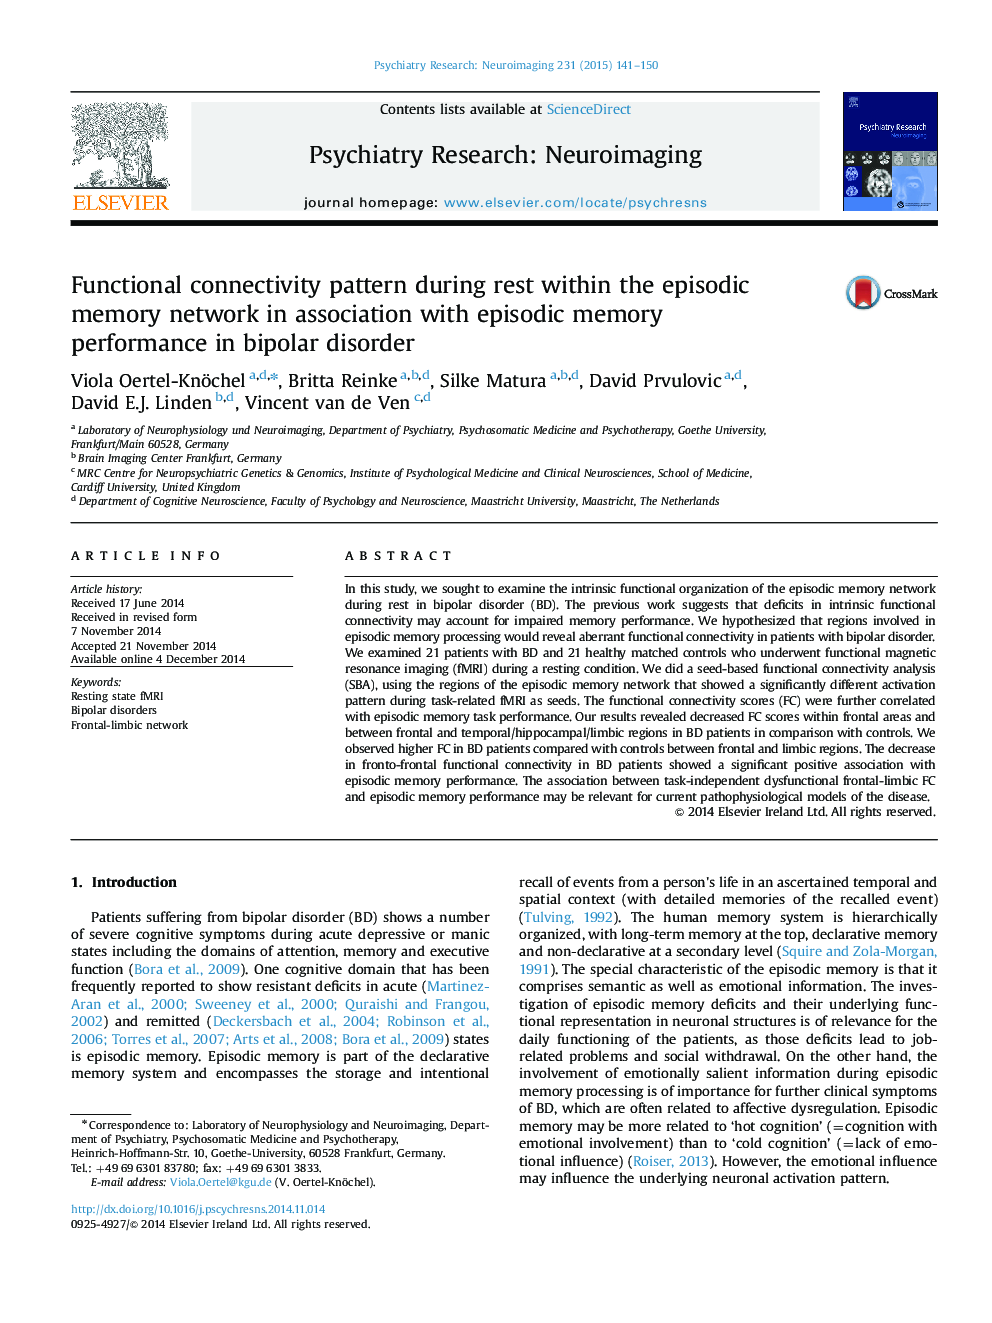 Functional connectivity pattern during rest within the episodic memory network in association with episodic memory performance in bipolar disorder